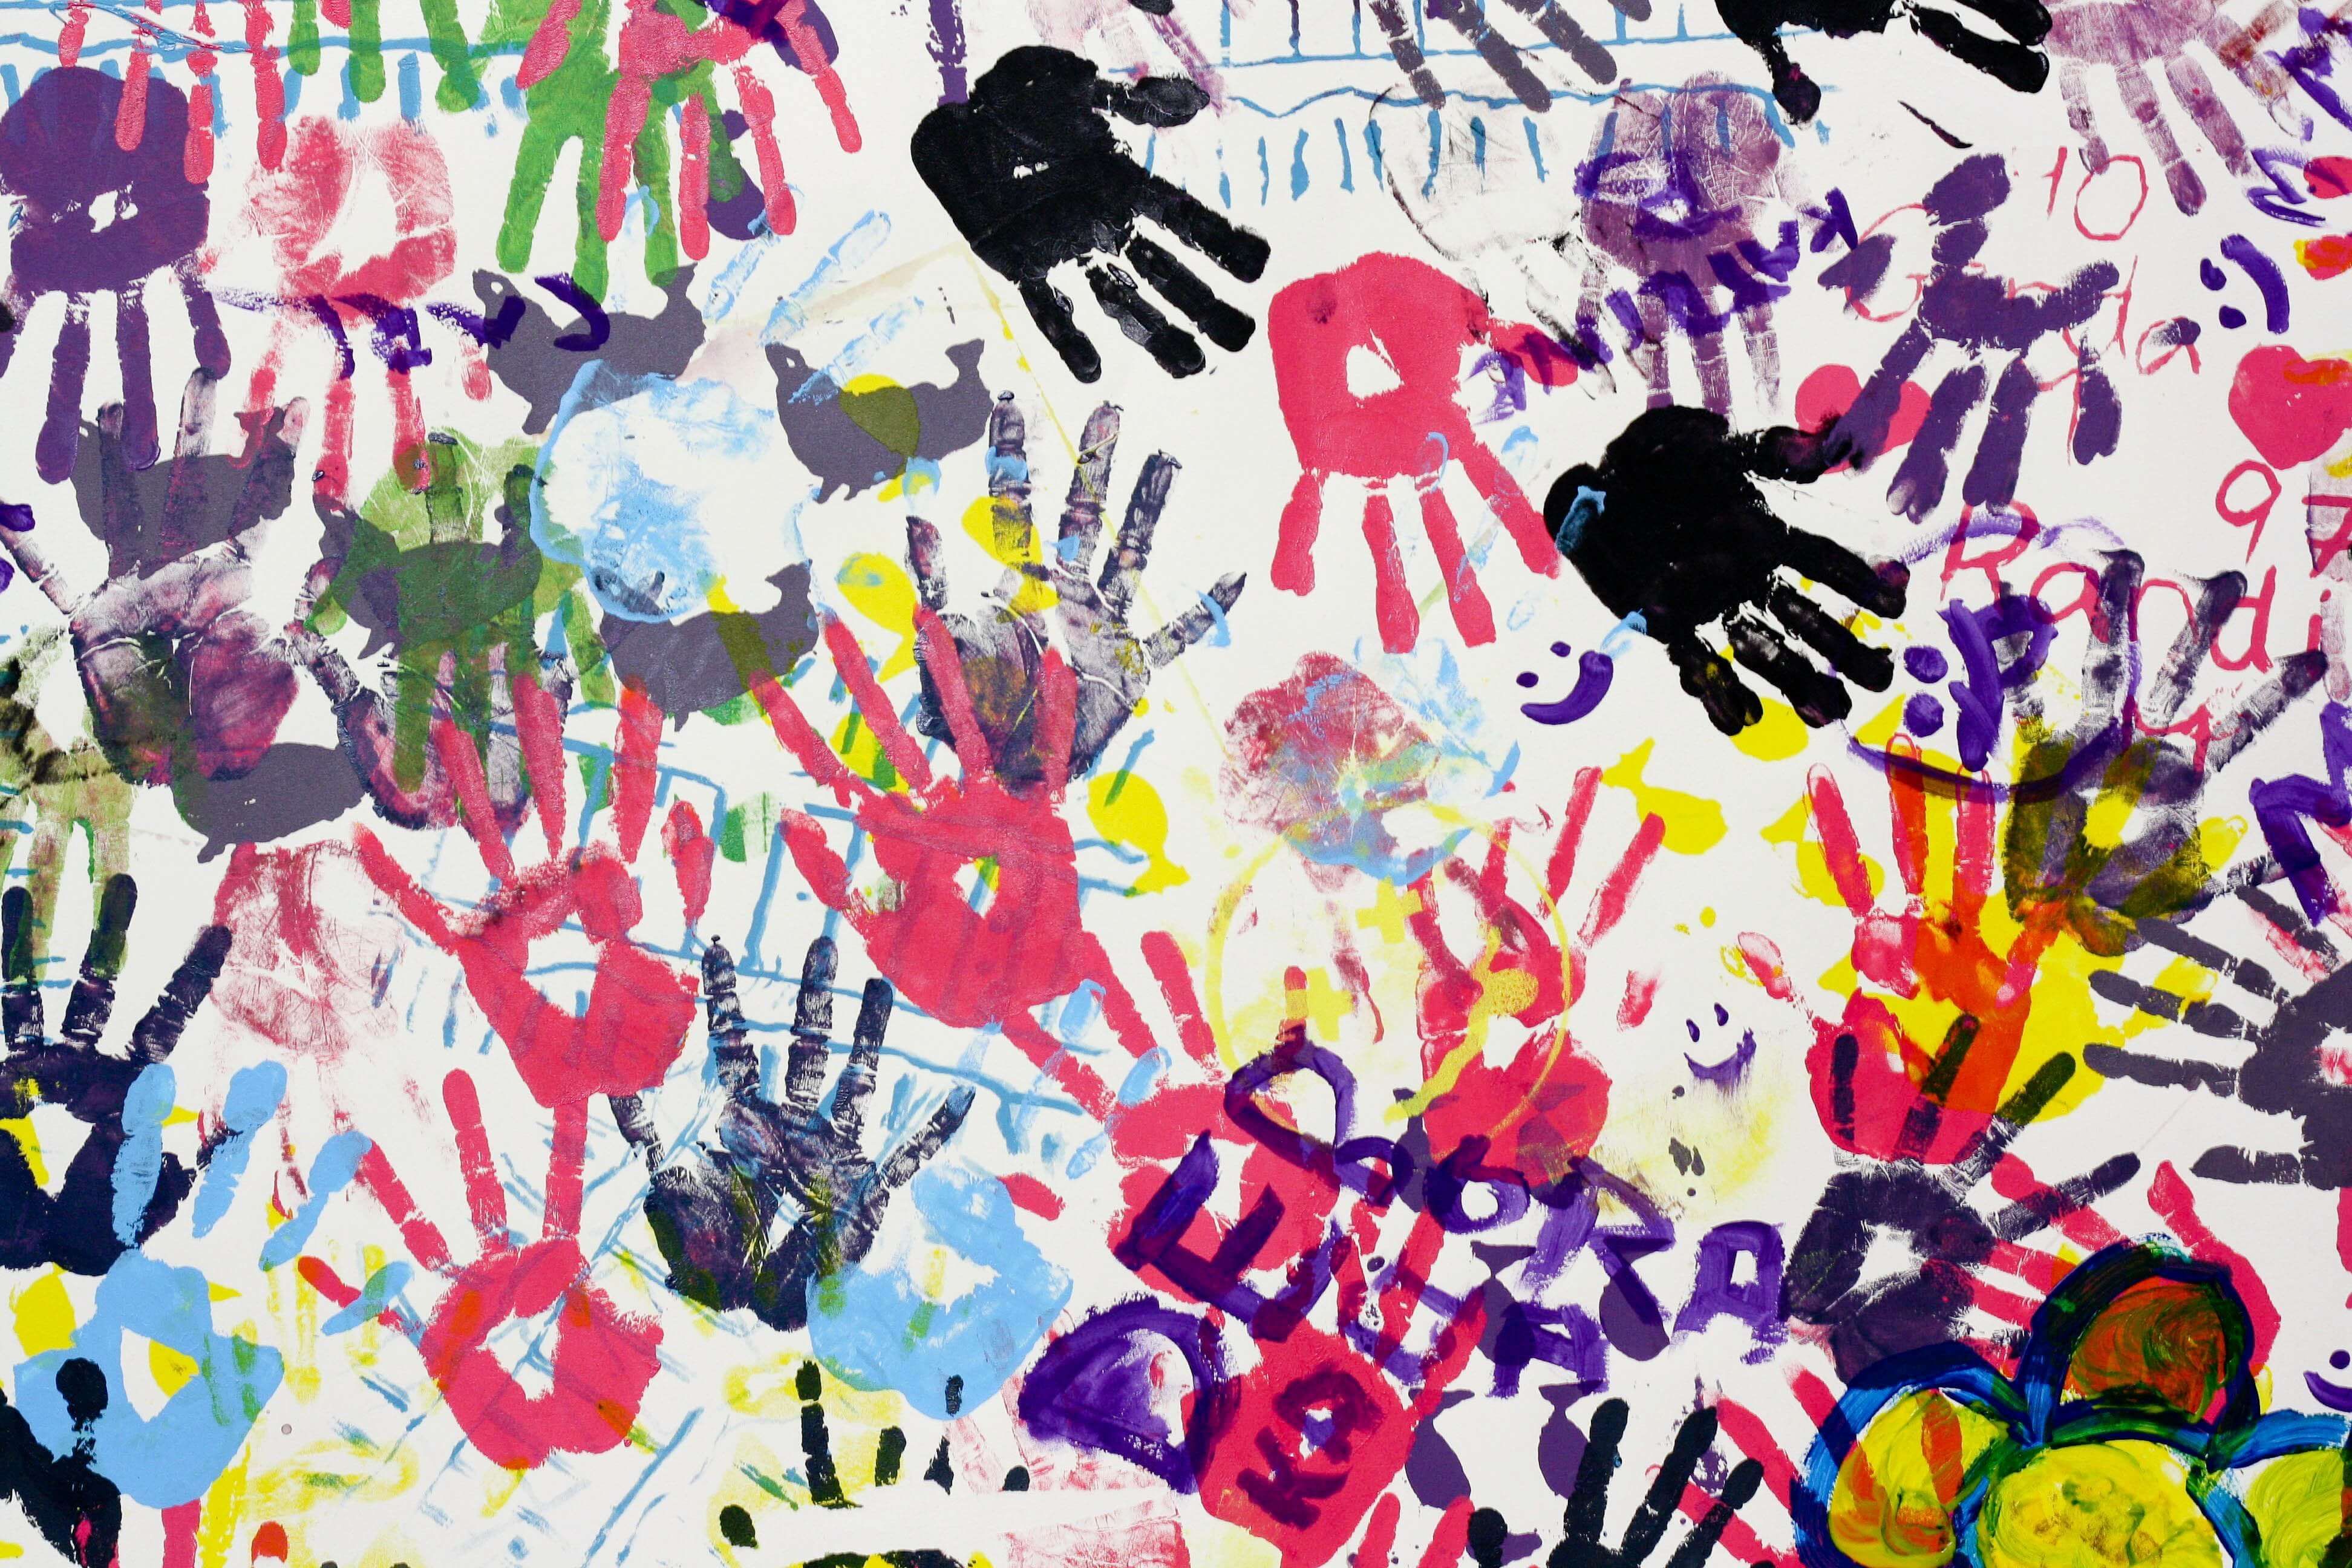 Colorful handprints on a wall - Comparing the influence of minimalist and maximalist aesthetics on the design industry - Image